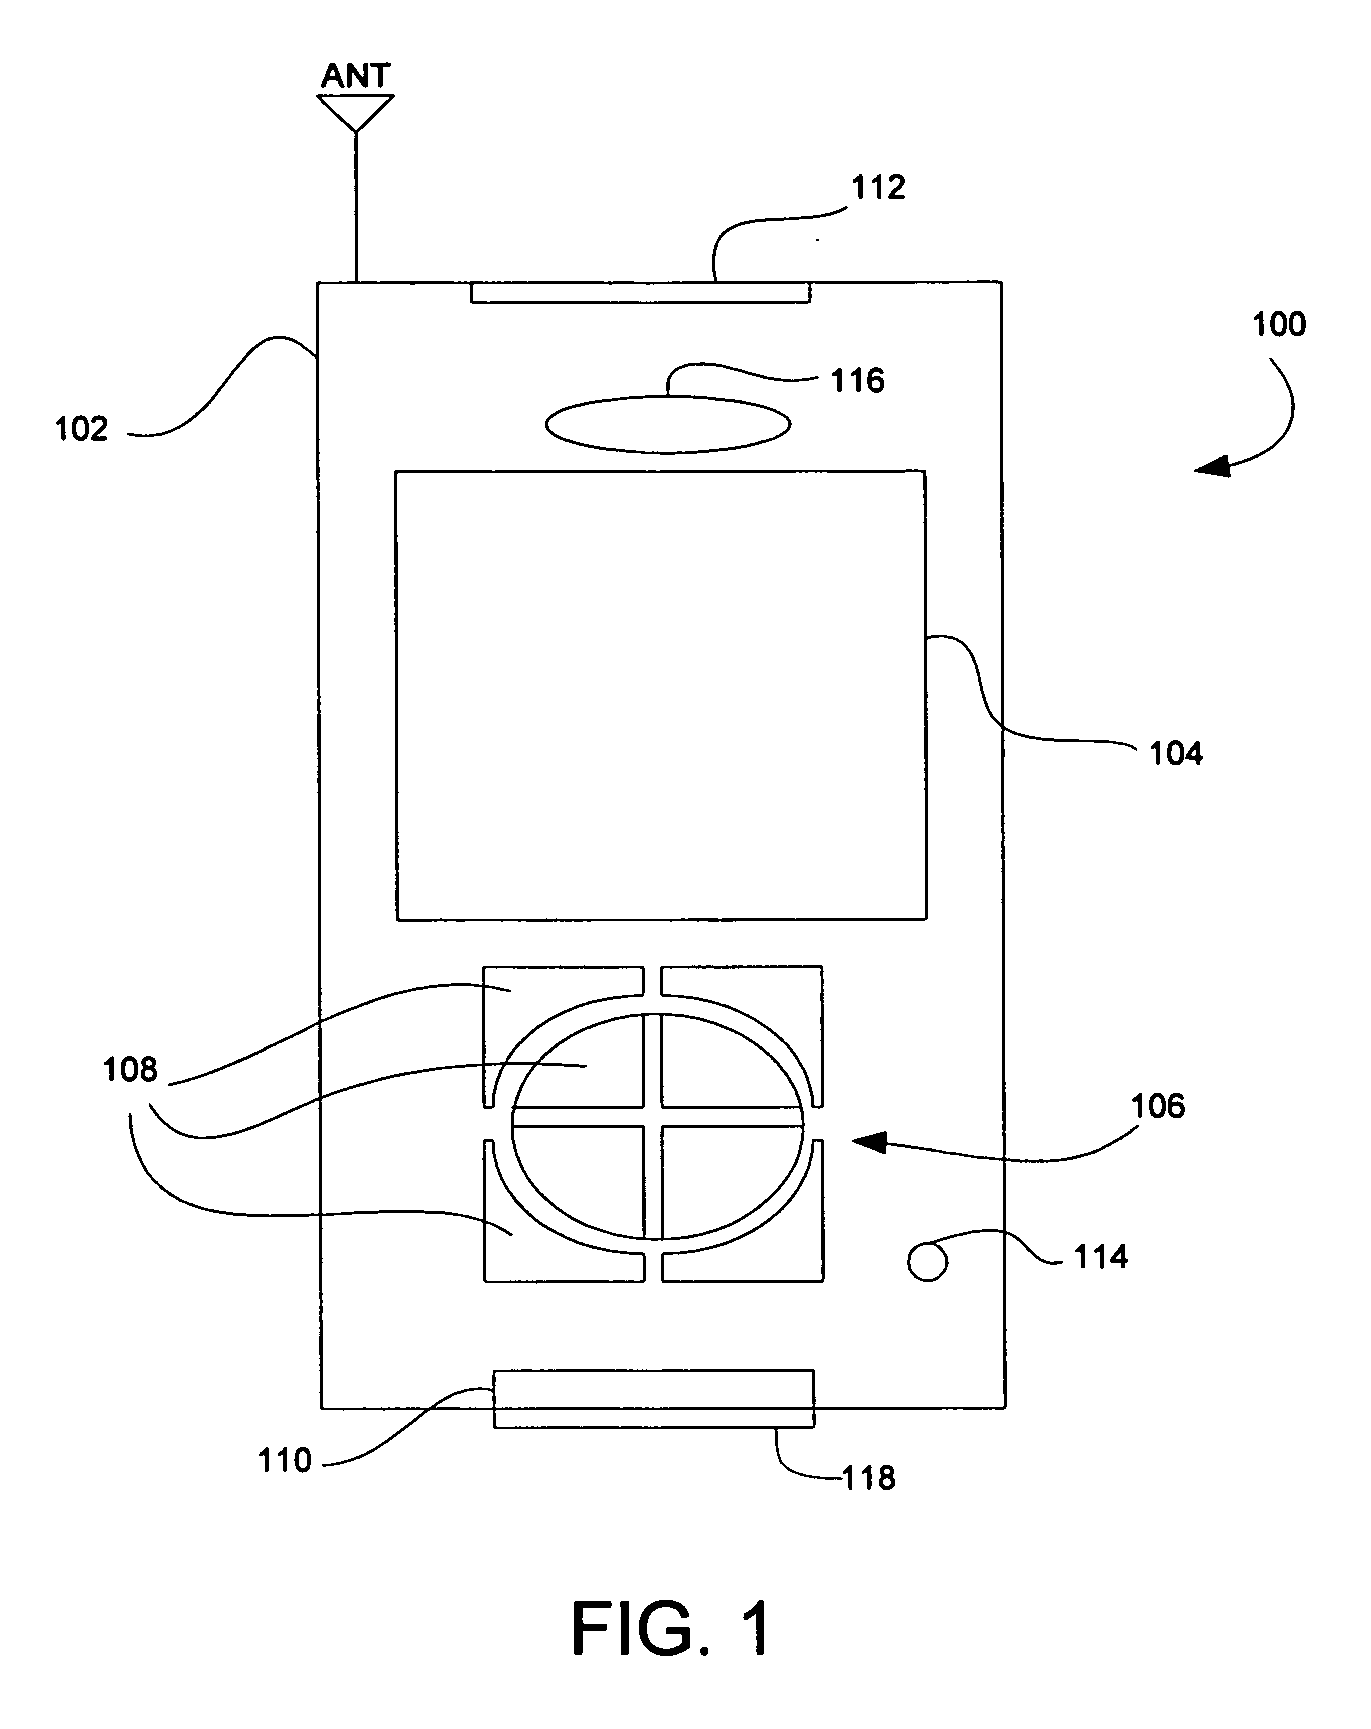 Device, system and method for controlling speed of a vehicle using a positional information device